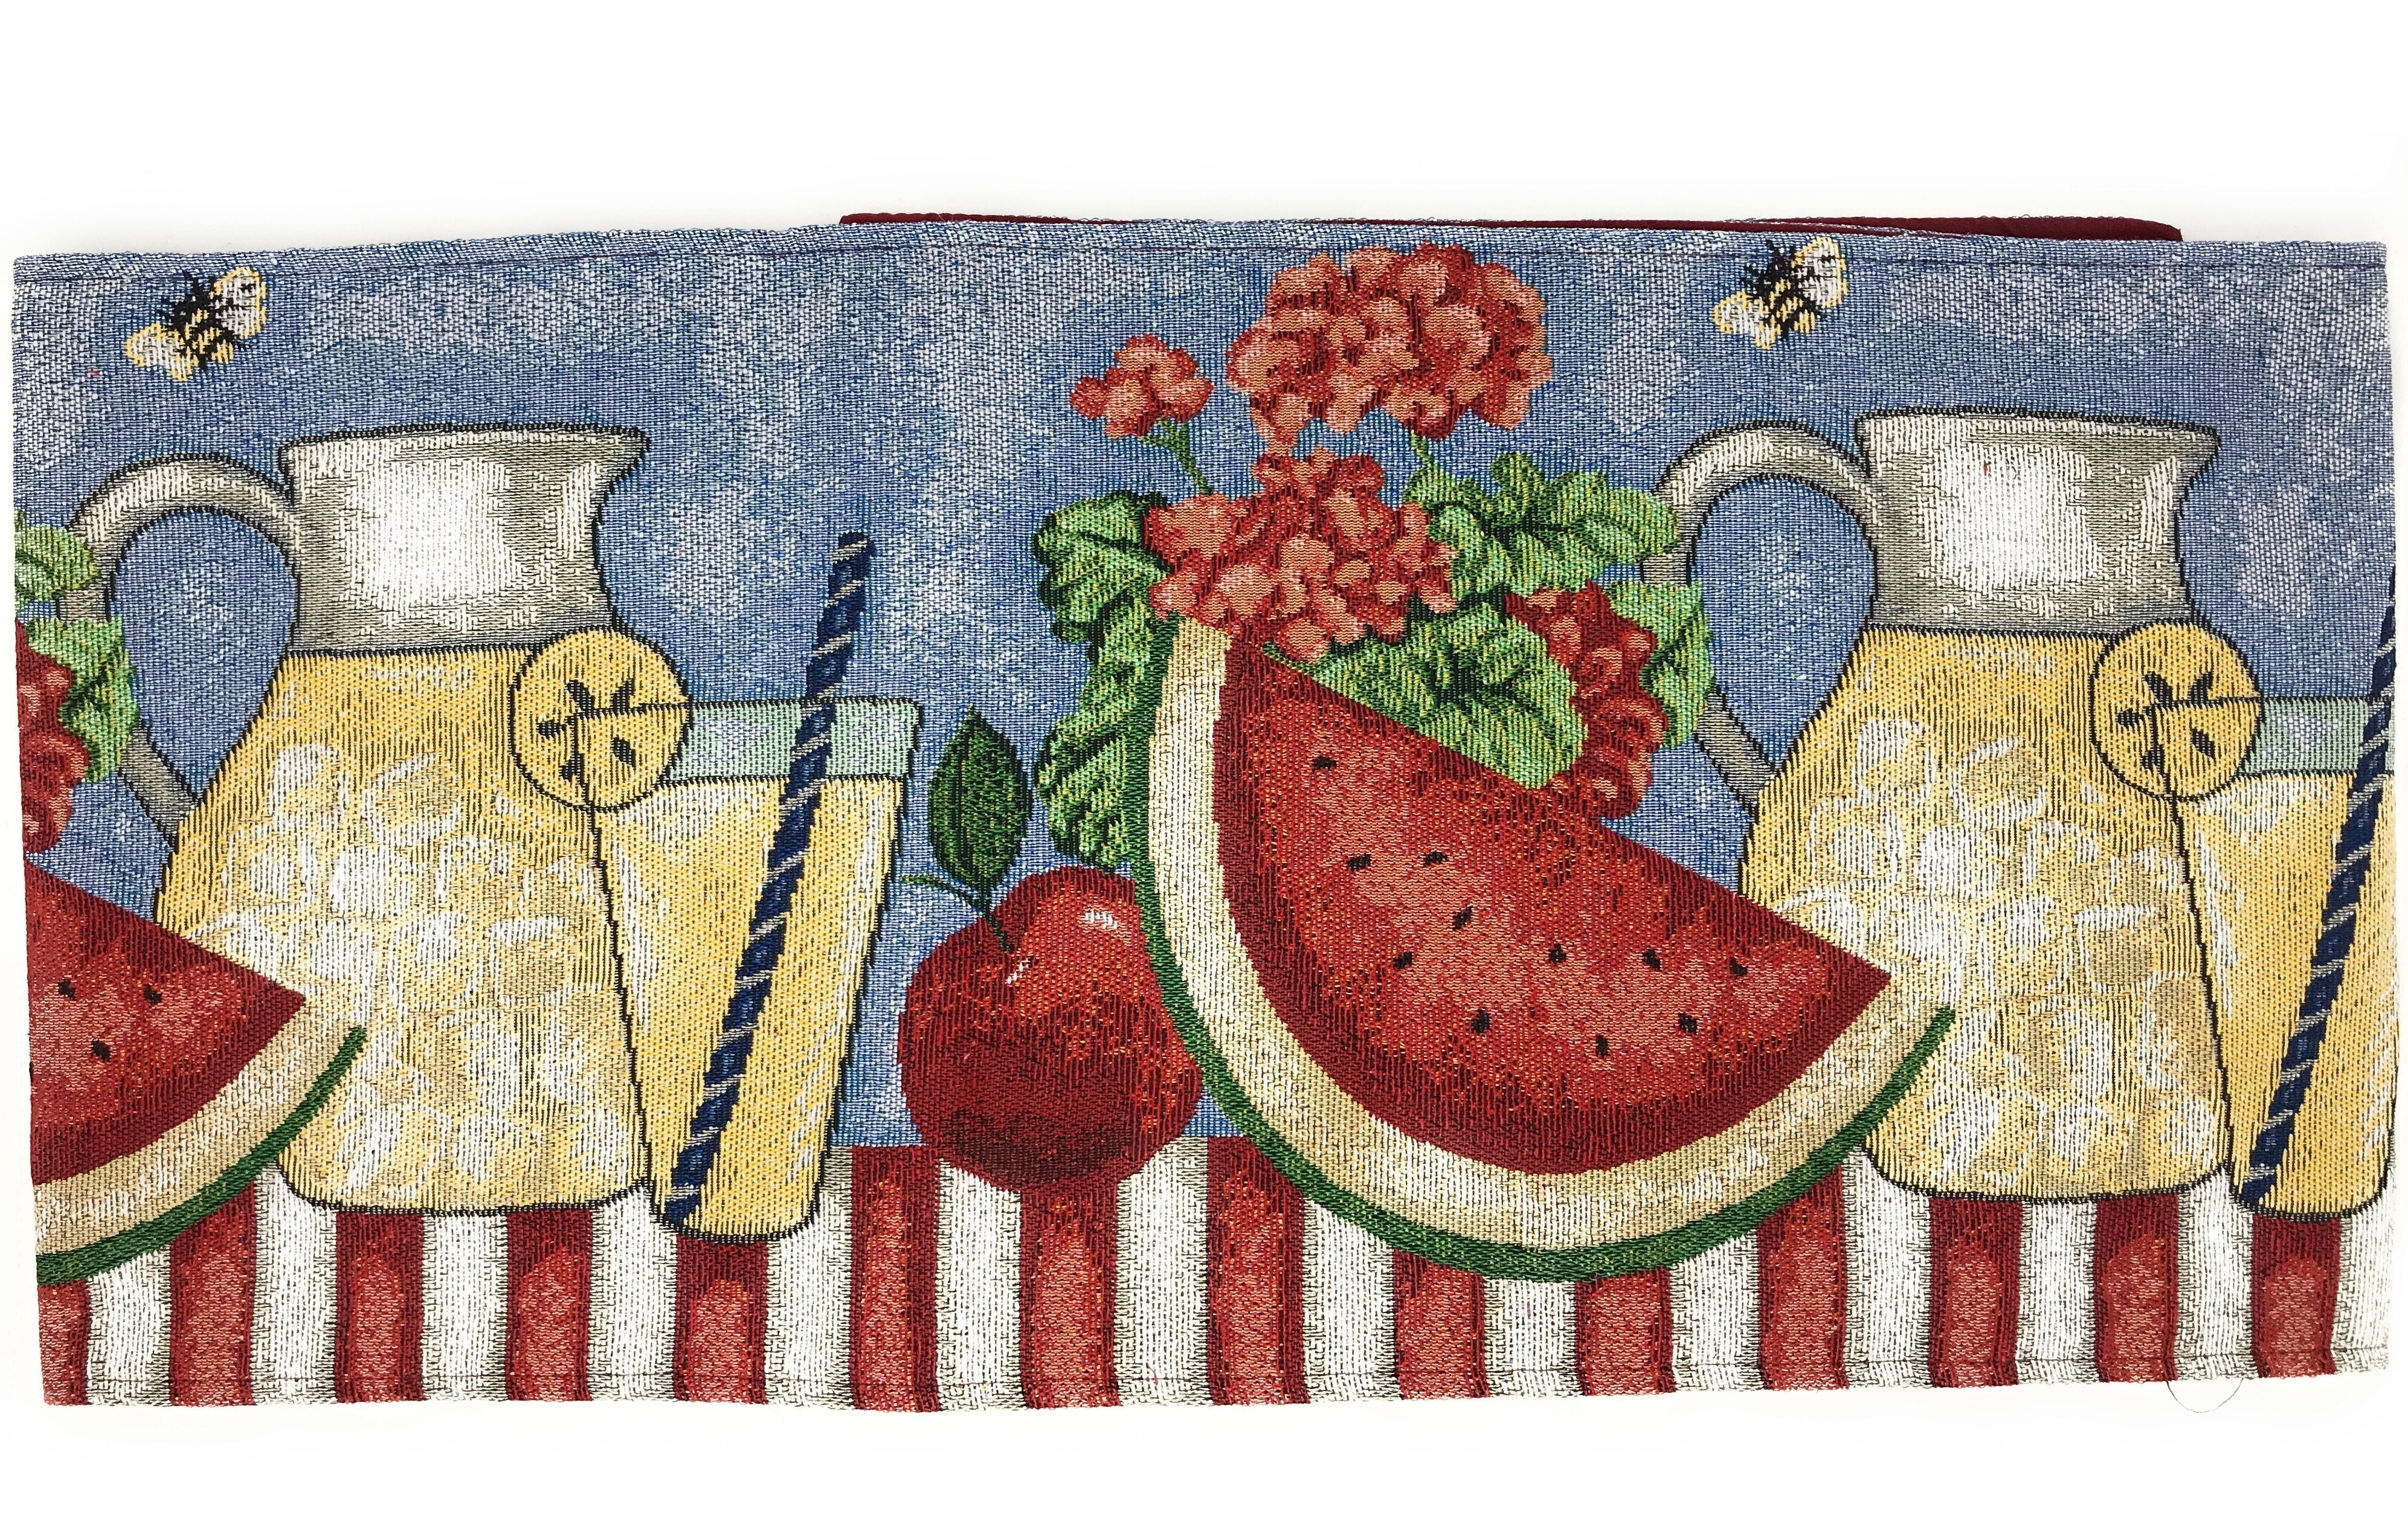 Tache Fruity Drinks Watermelon Lemonade Woven Tapestry Table Runners (13082TR) - Tache Home Fashion